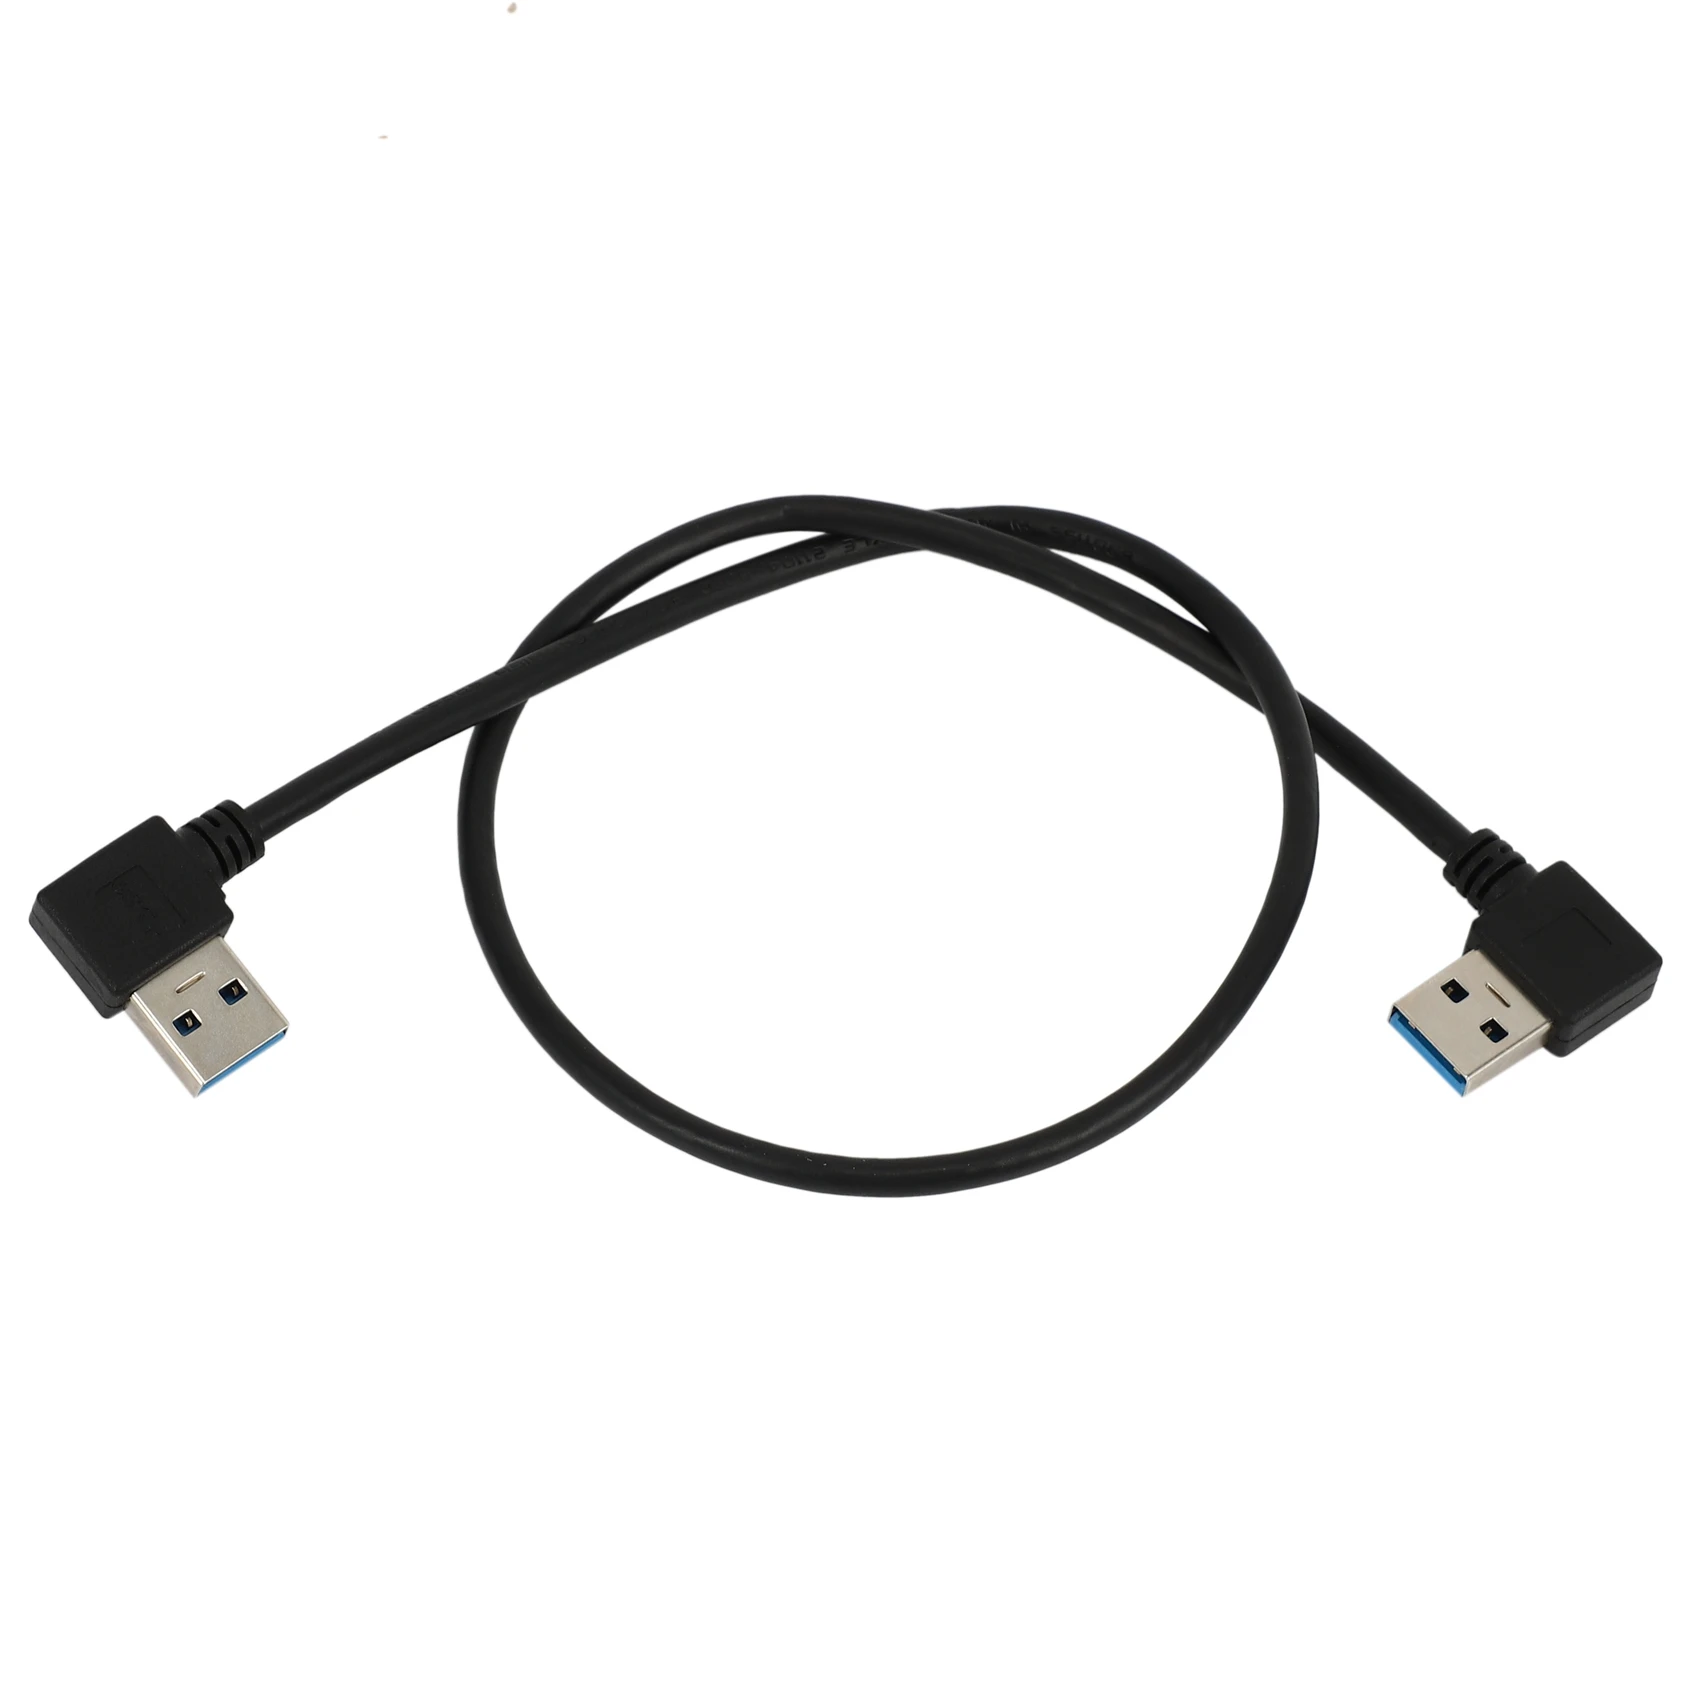 

USB 3.0 Type A Male 90 Degree Left Angled to Right Angled Extension Cable Straight Connection 0.5M 1.5FT